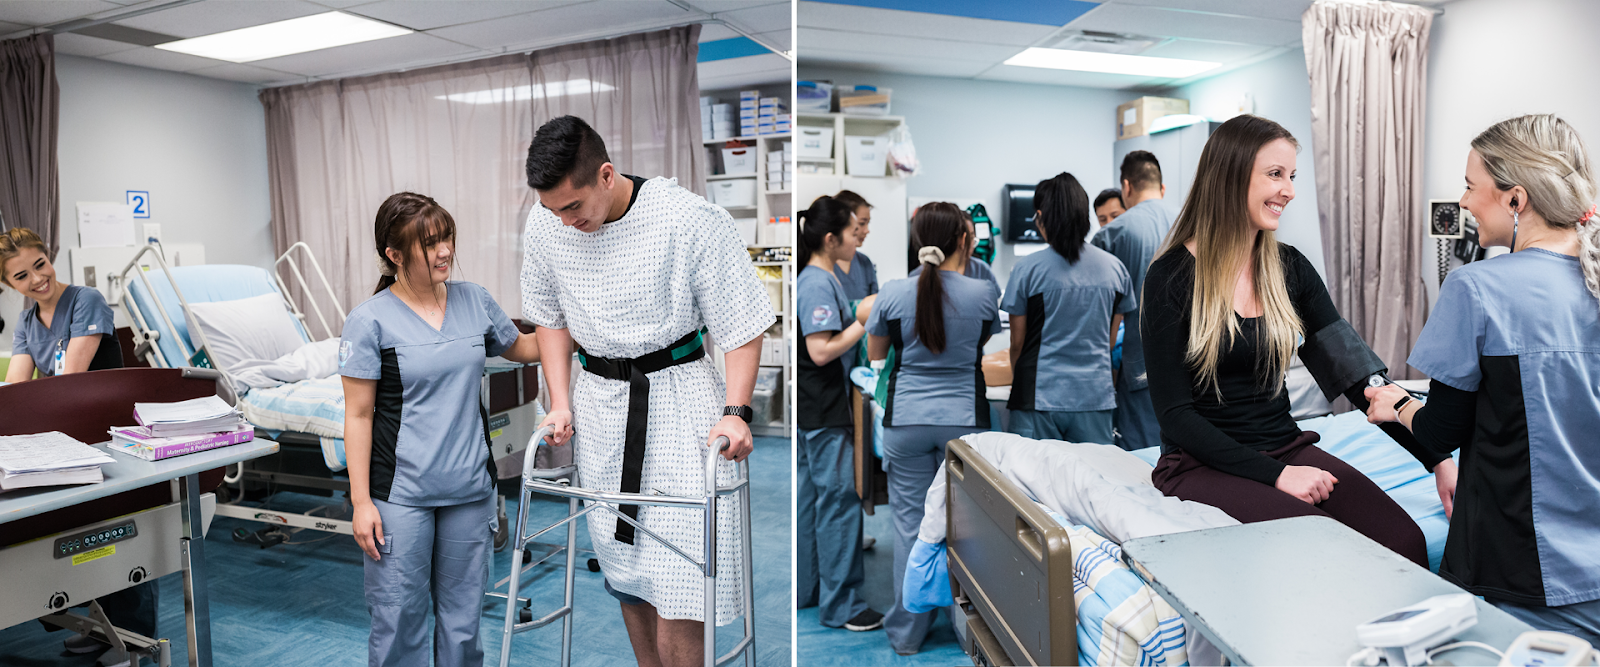 two images side by side of sprott shaw college's partnership with Kelowna general hospital, showing patients being examined and assisted, with students in scrubs 